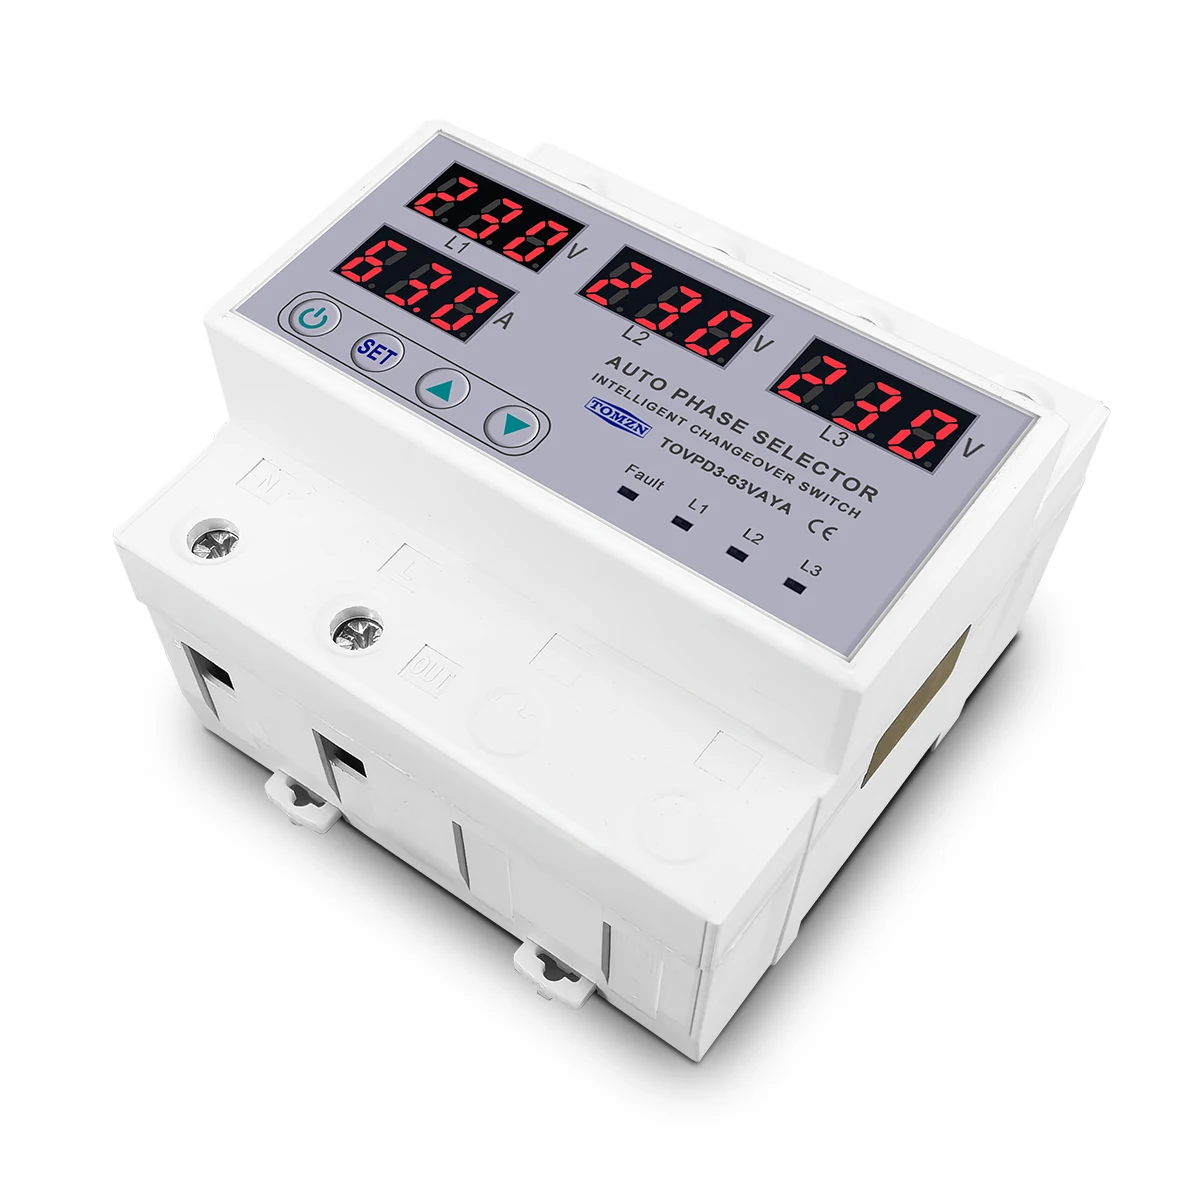 63A TOMZN 3 phase 3P+N Din rail phase selector adjustable Over and Under Voltage current protection Monitor Relays Protector